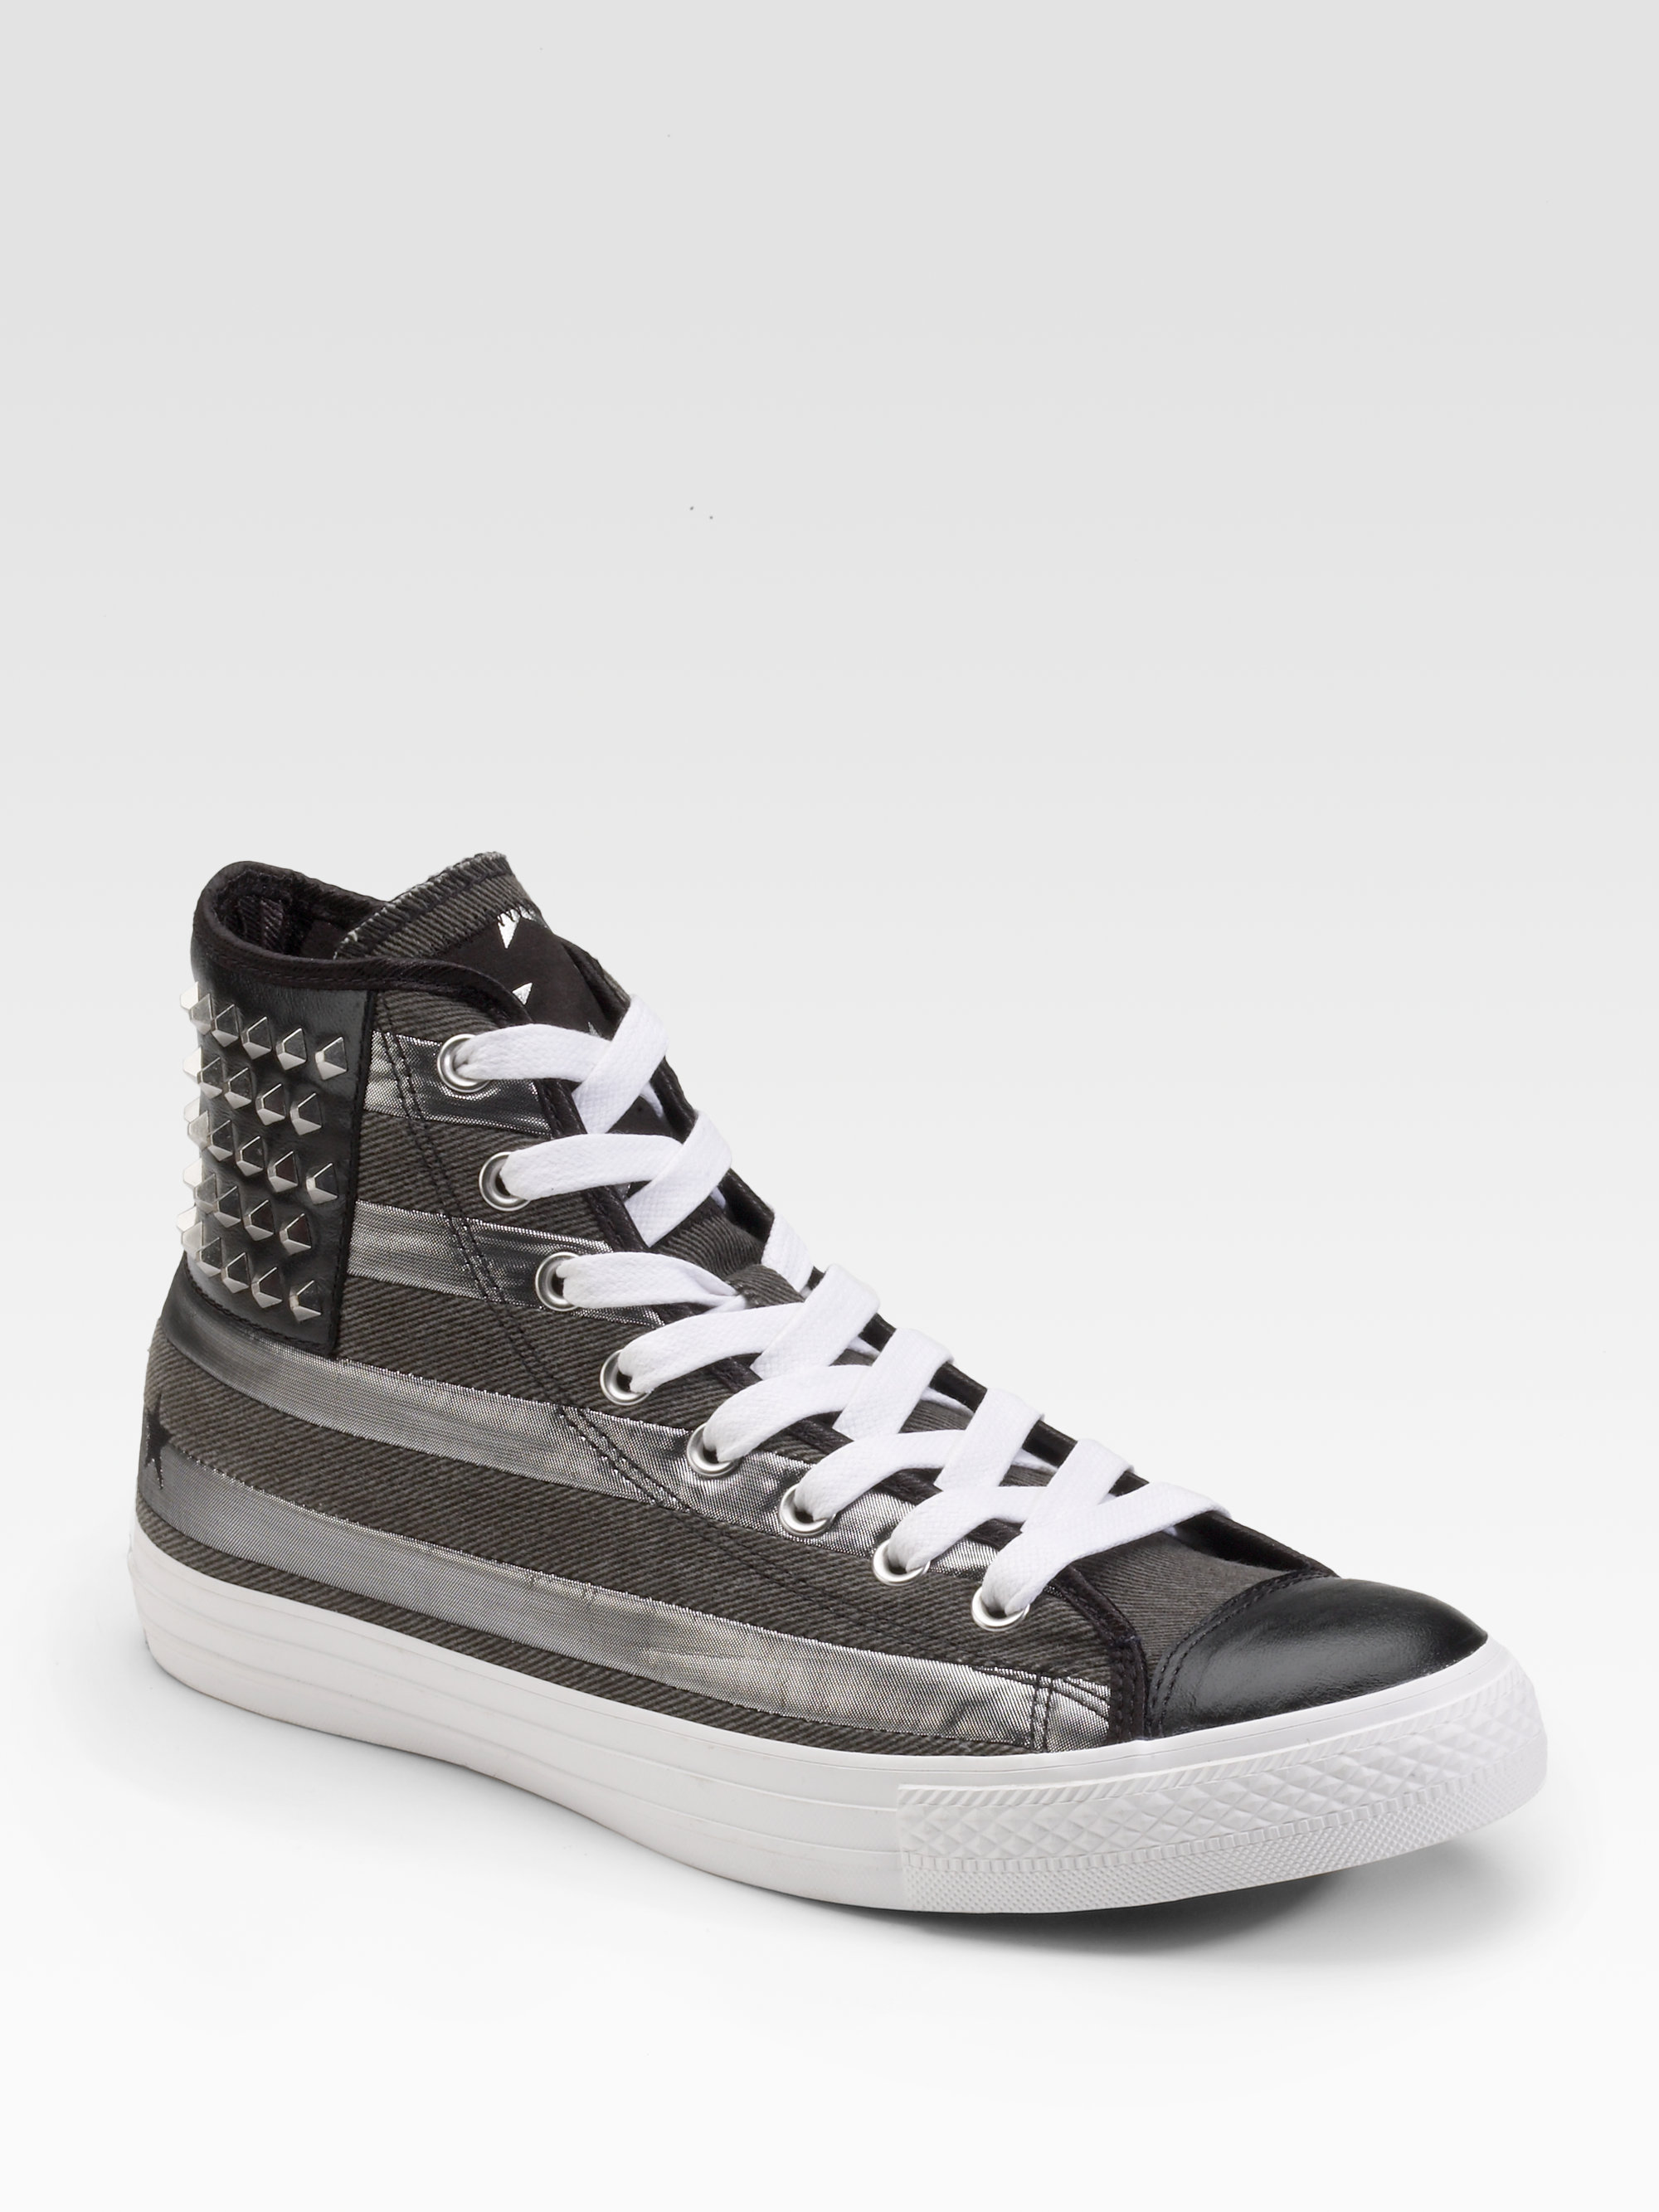 Converse Chuck Taylor Studded Flag High-top Sneakers in Black-Silver (Black)  for Men - Lyst